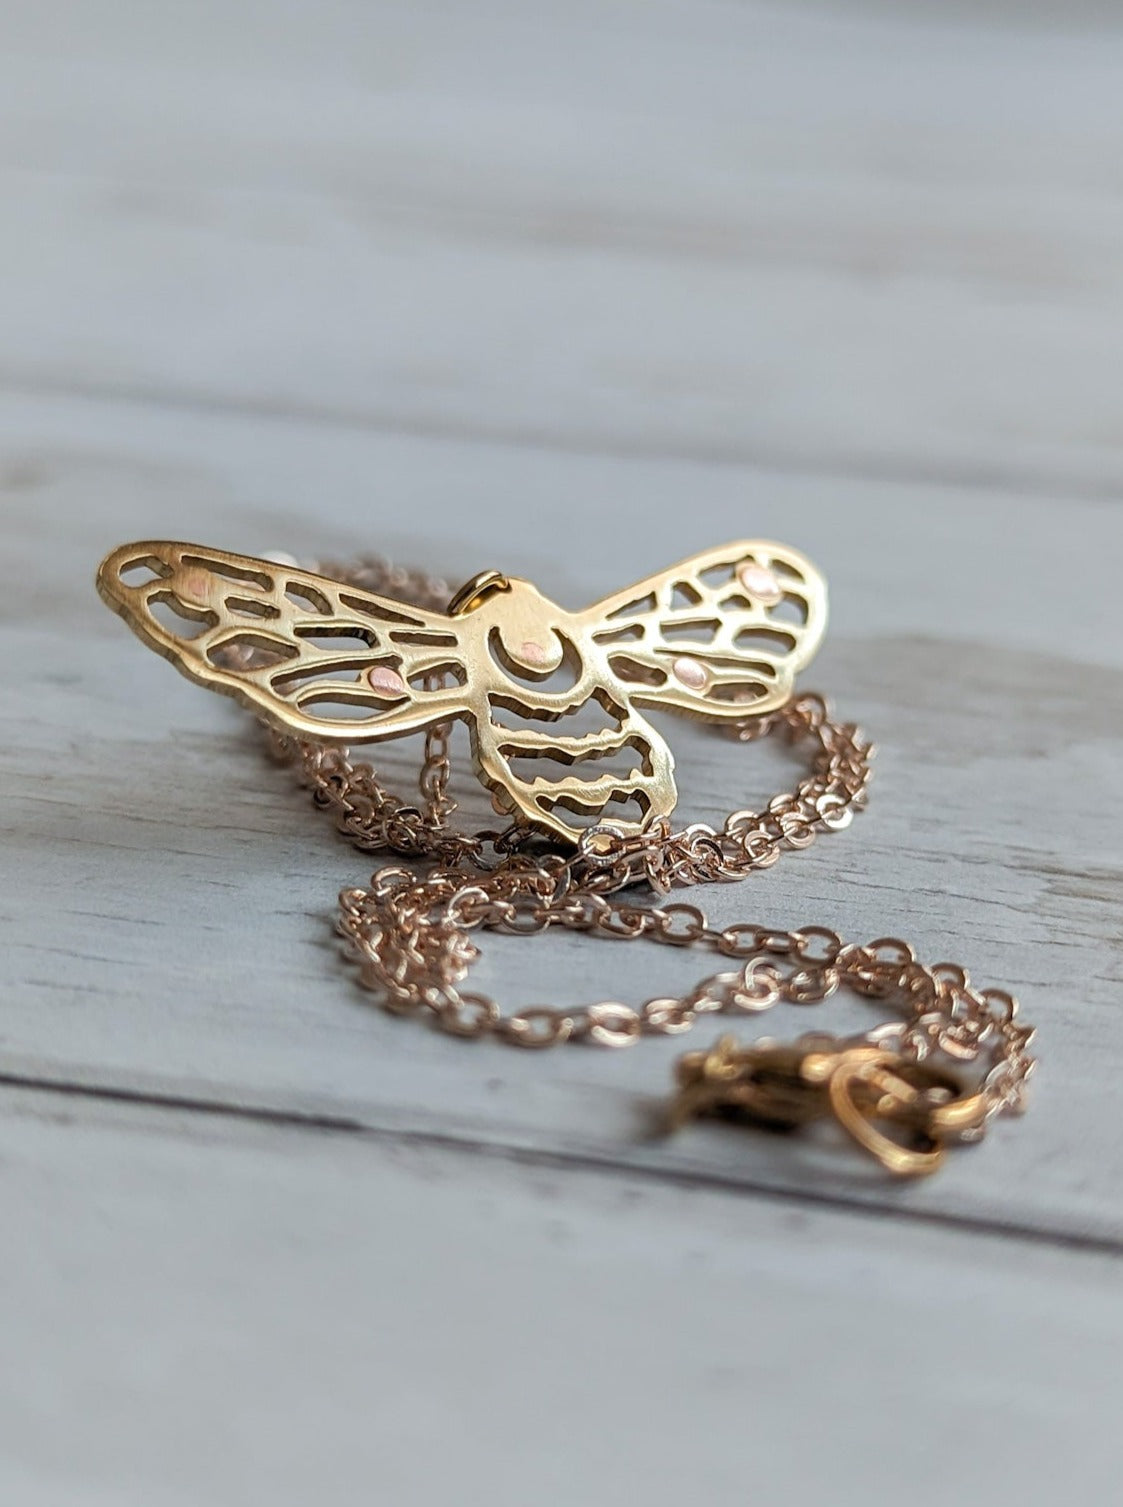 Bumblebee in flight gold necklace